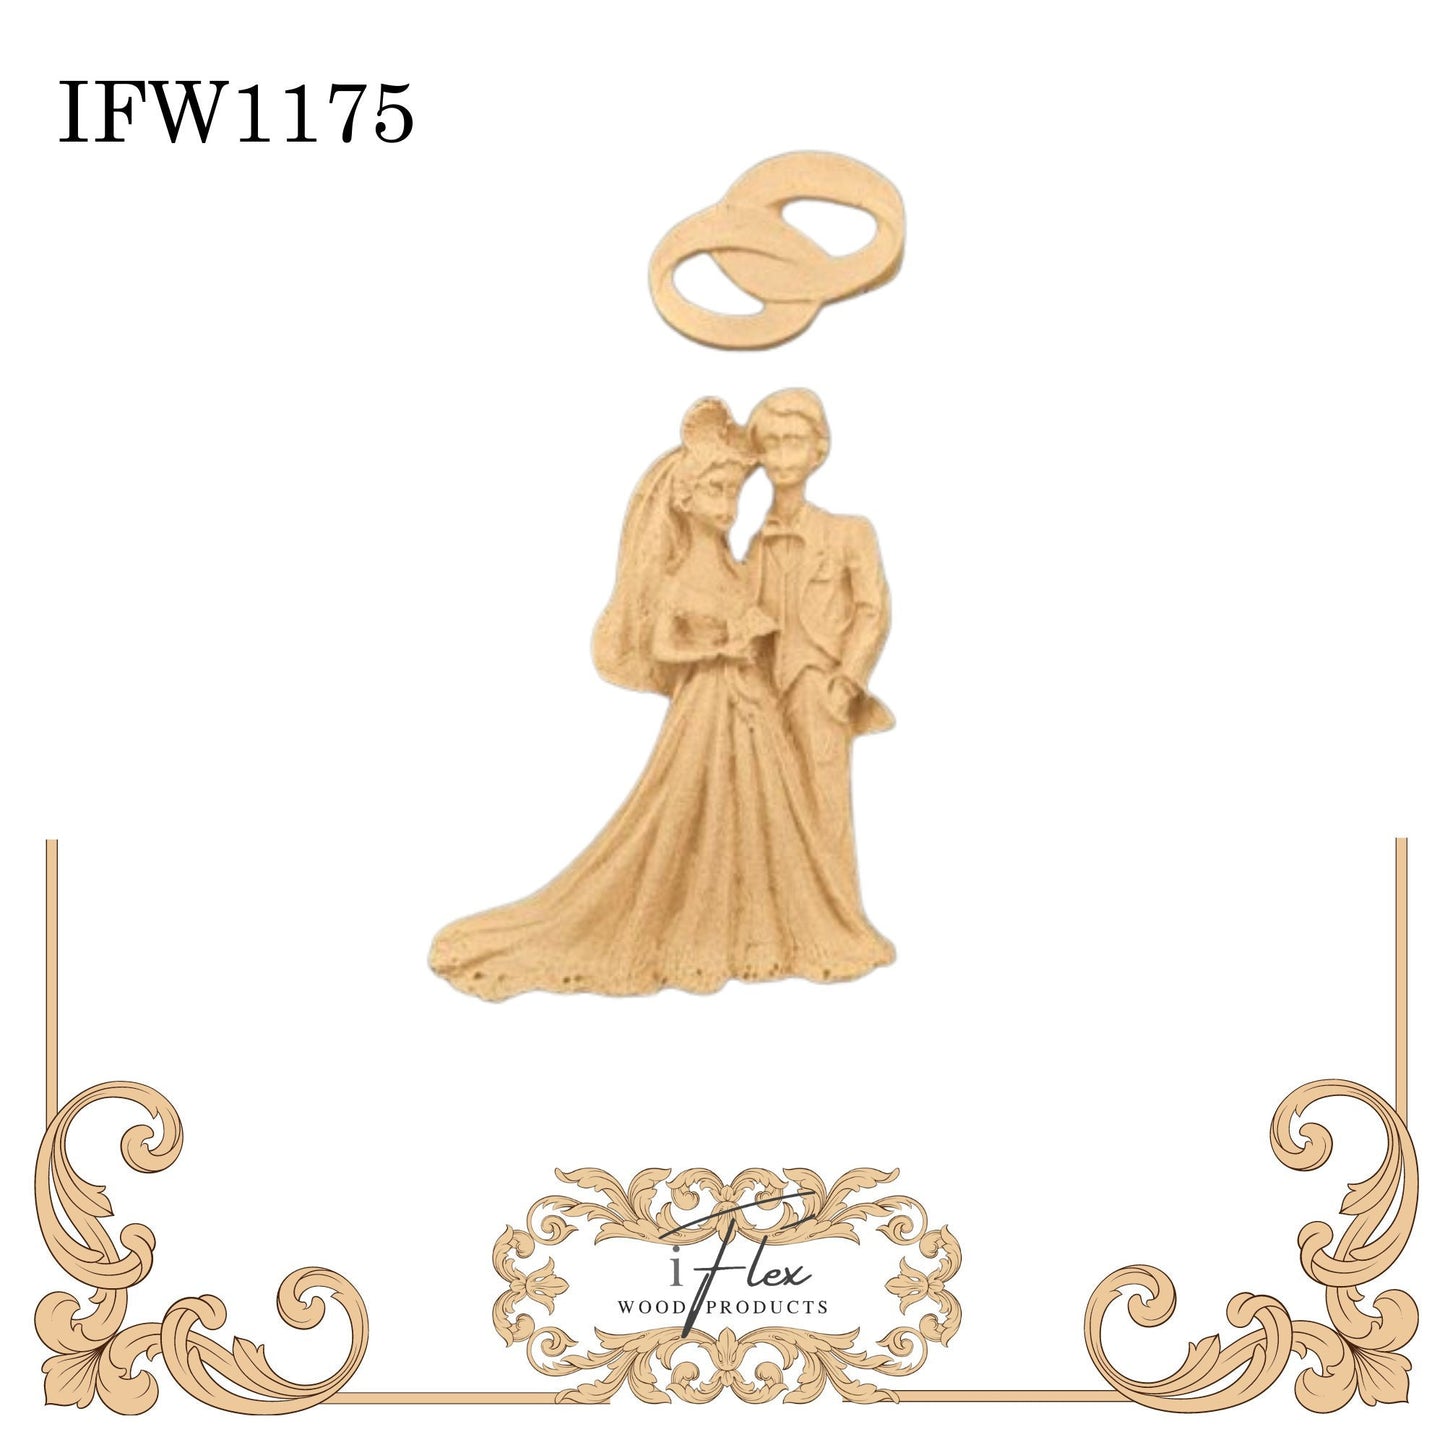 IFW 1175 iFlex Wood Products, bendable mouldings, flexible, wooden appliques, misc